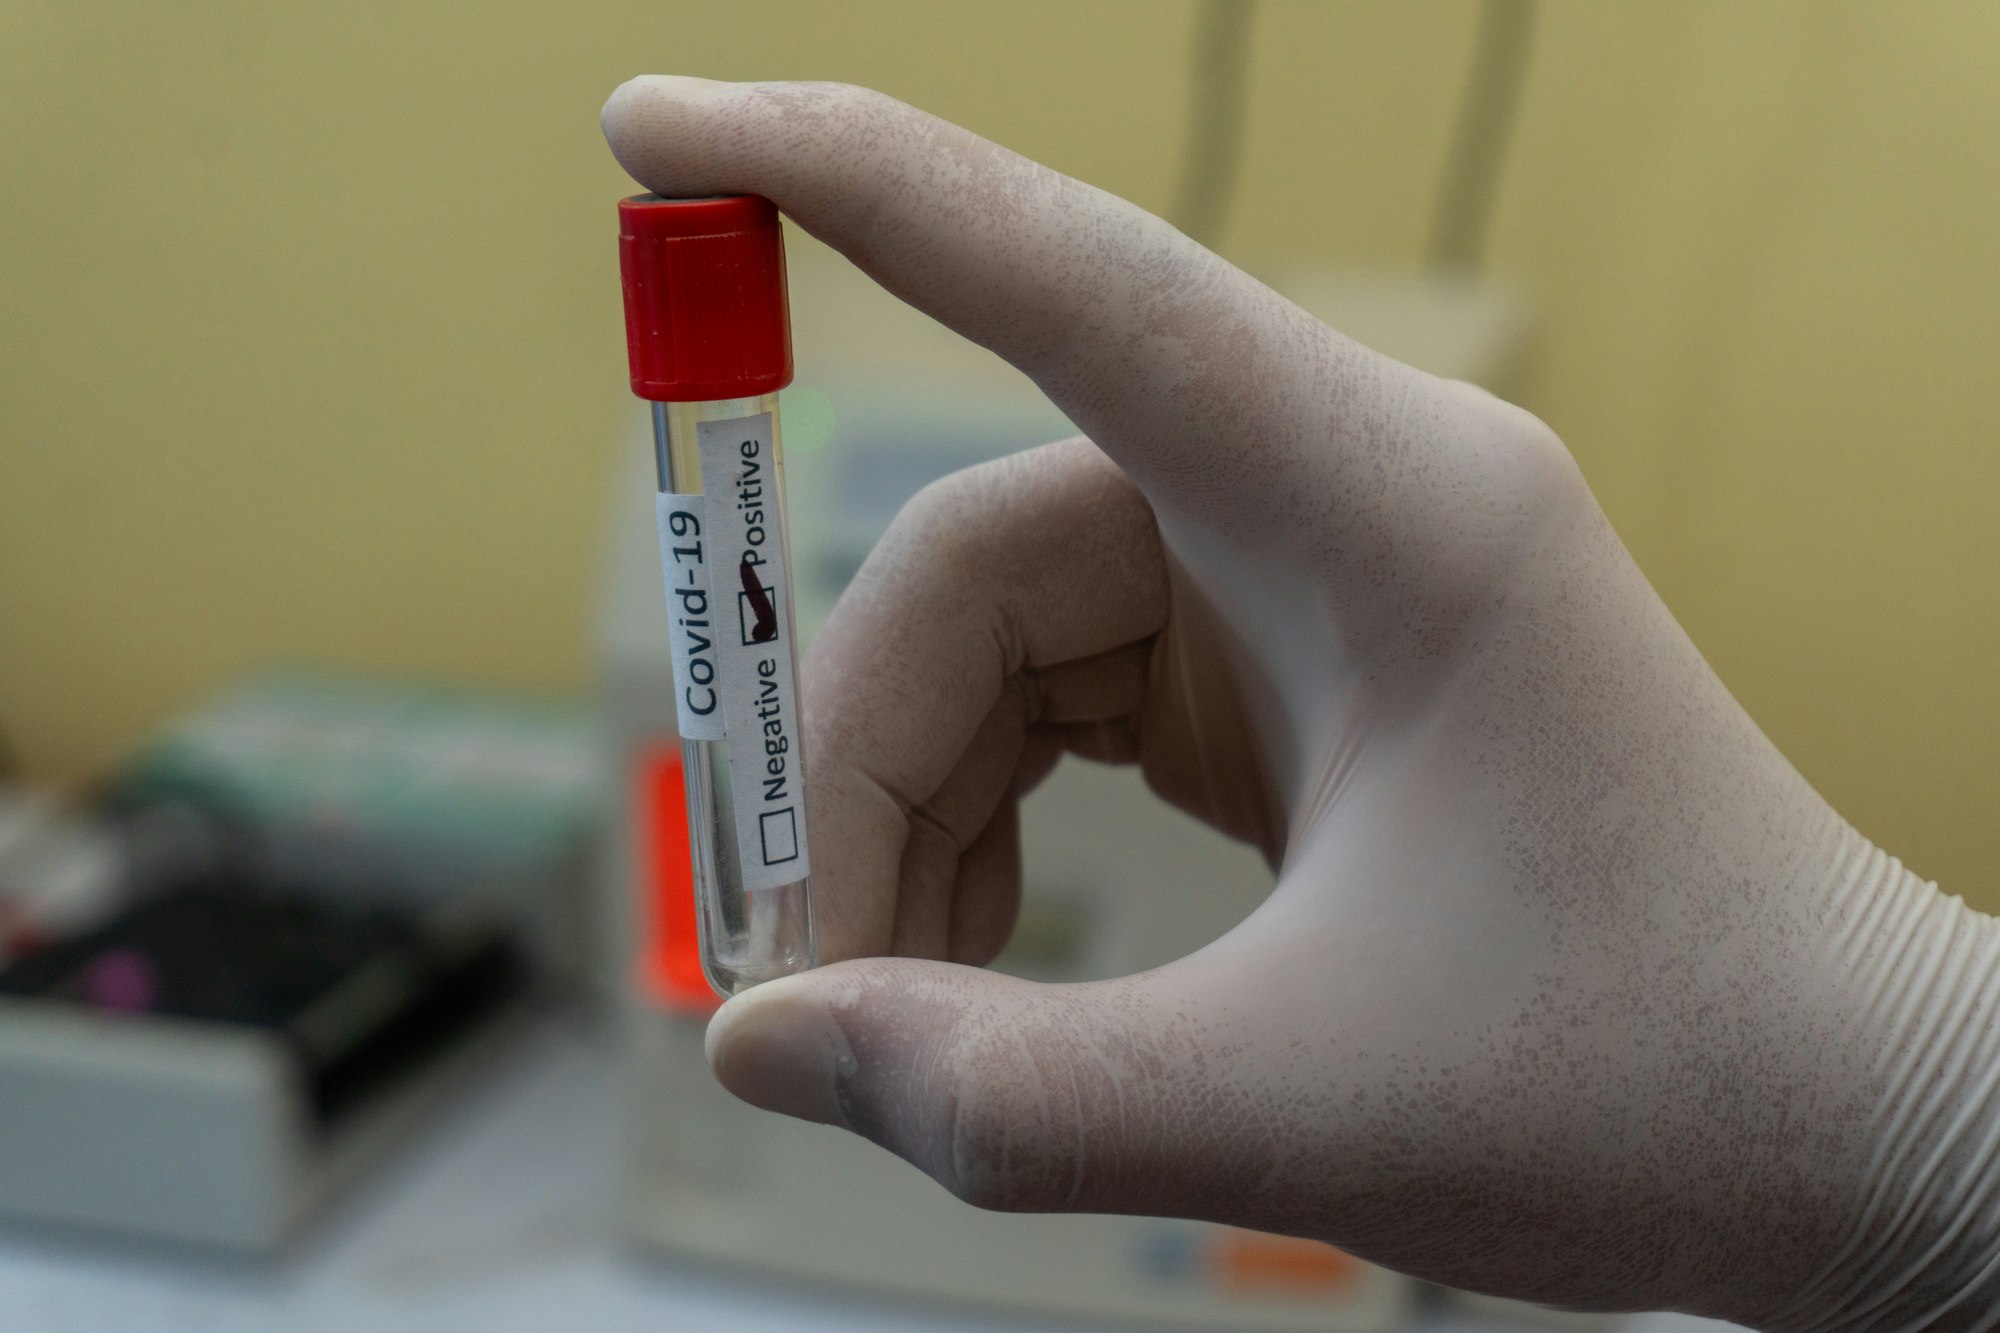 Gloved hand holding a test tube with a label indicating a positive COVID-19 result